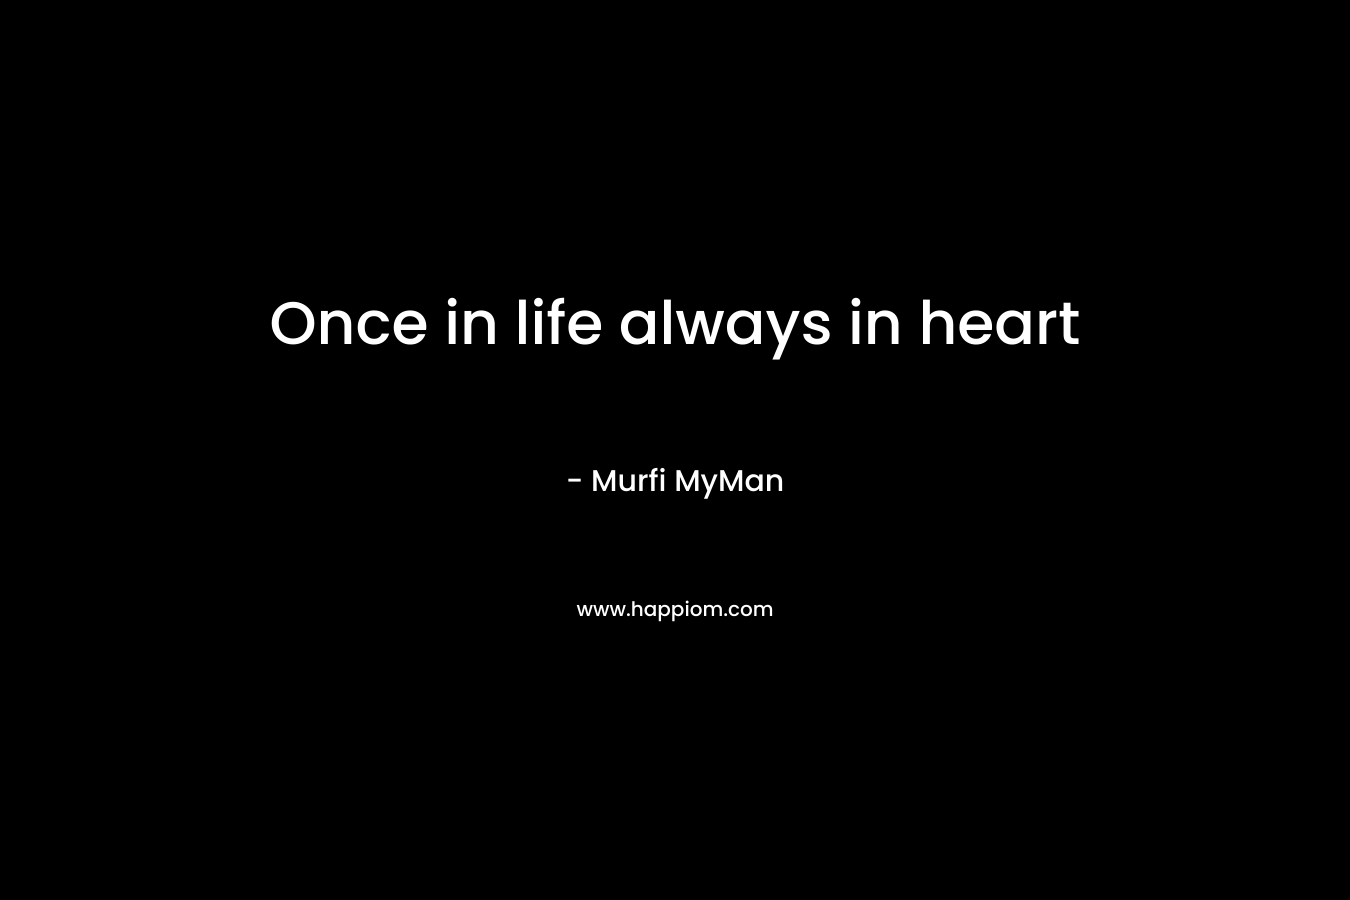 Once in life always in heart